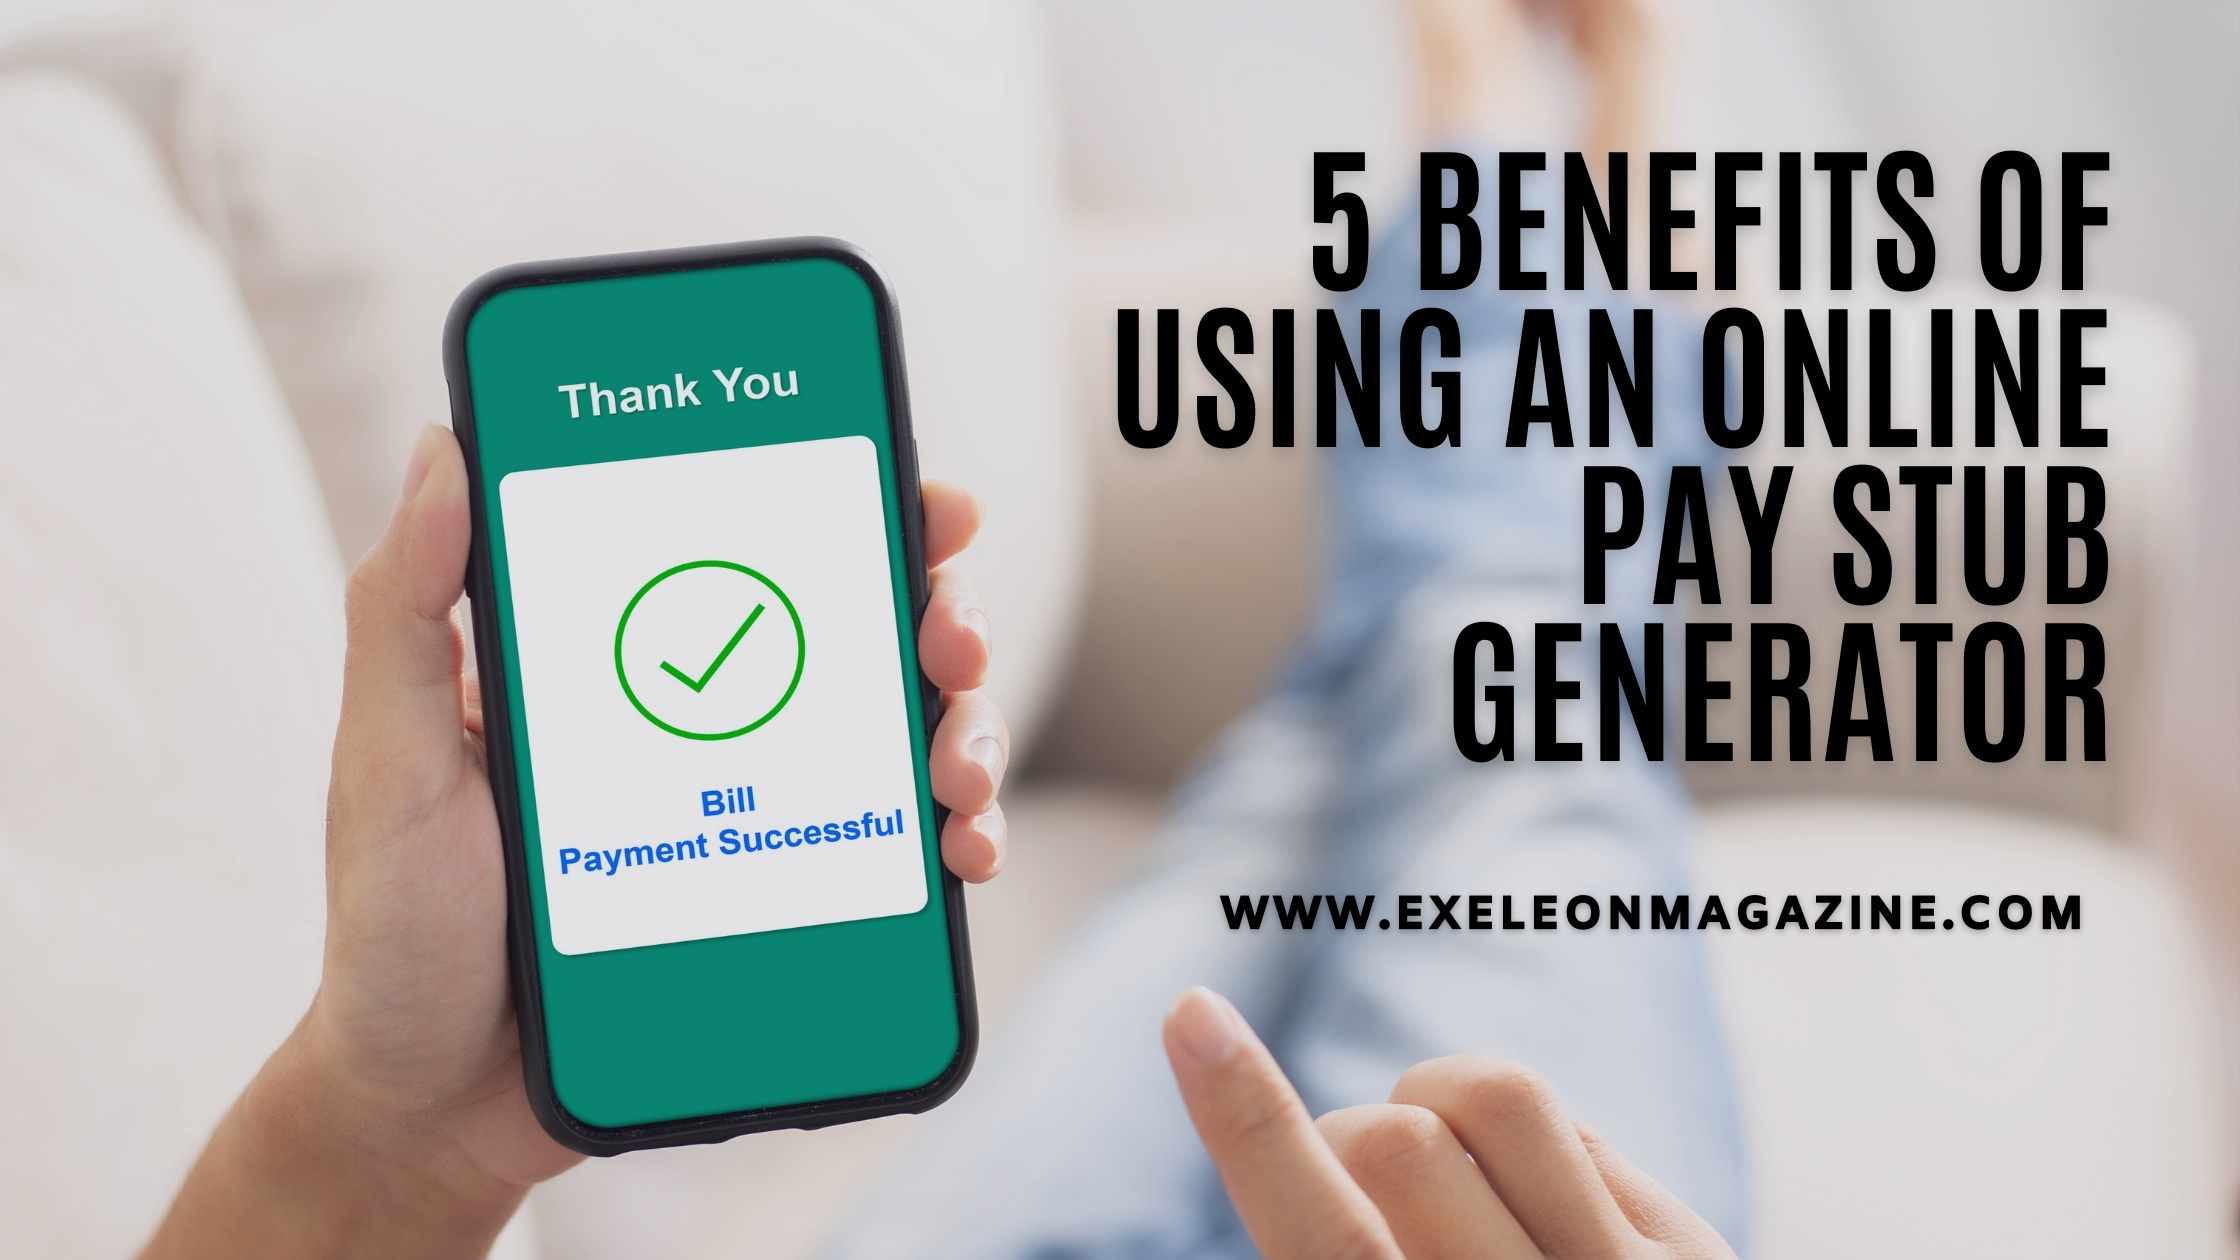 5 Benefits of Using an Online Pay Stub Generator